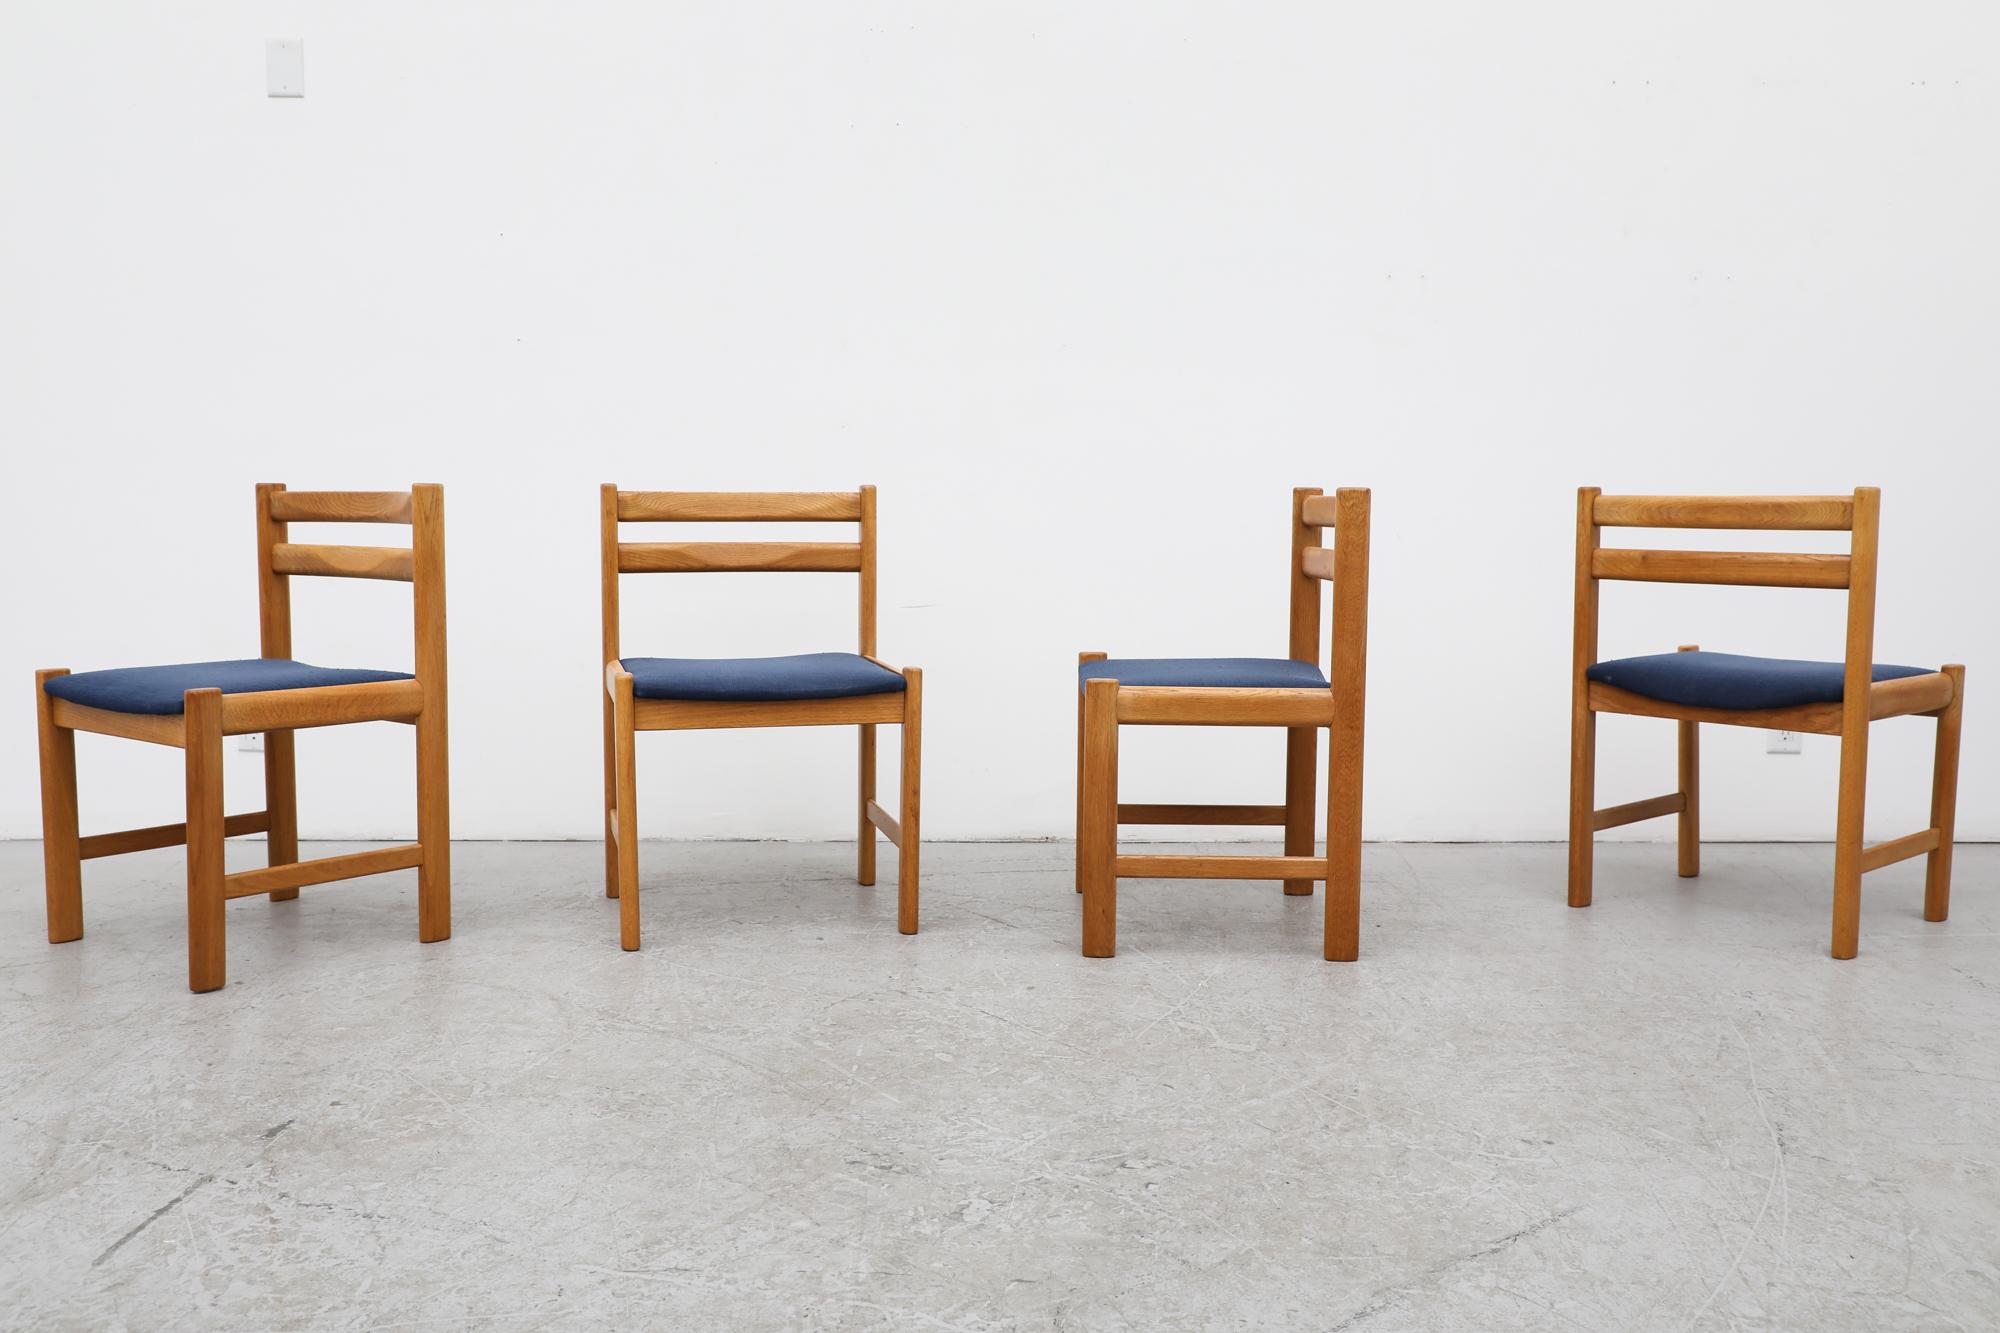 Set of 4 mid-century Danish oak dining chairs with original blue upholstery on seats, 1970s. In original condition with visible wear consistent with their age and use. Set price.